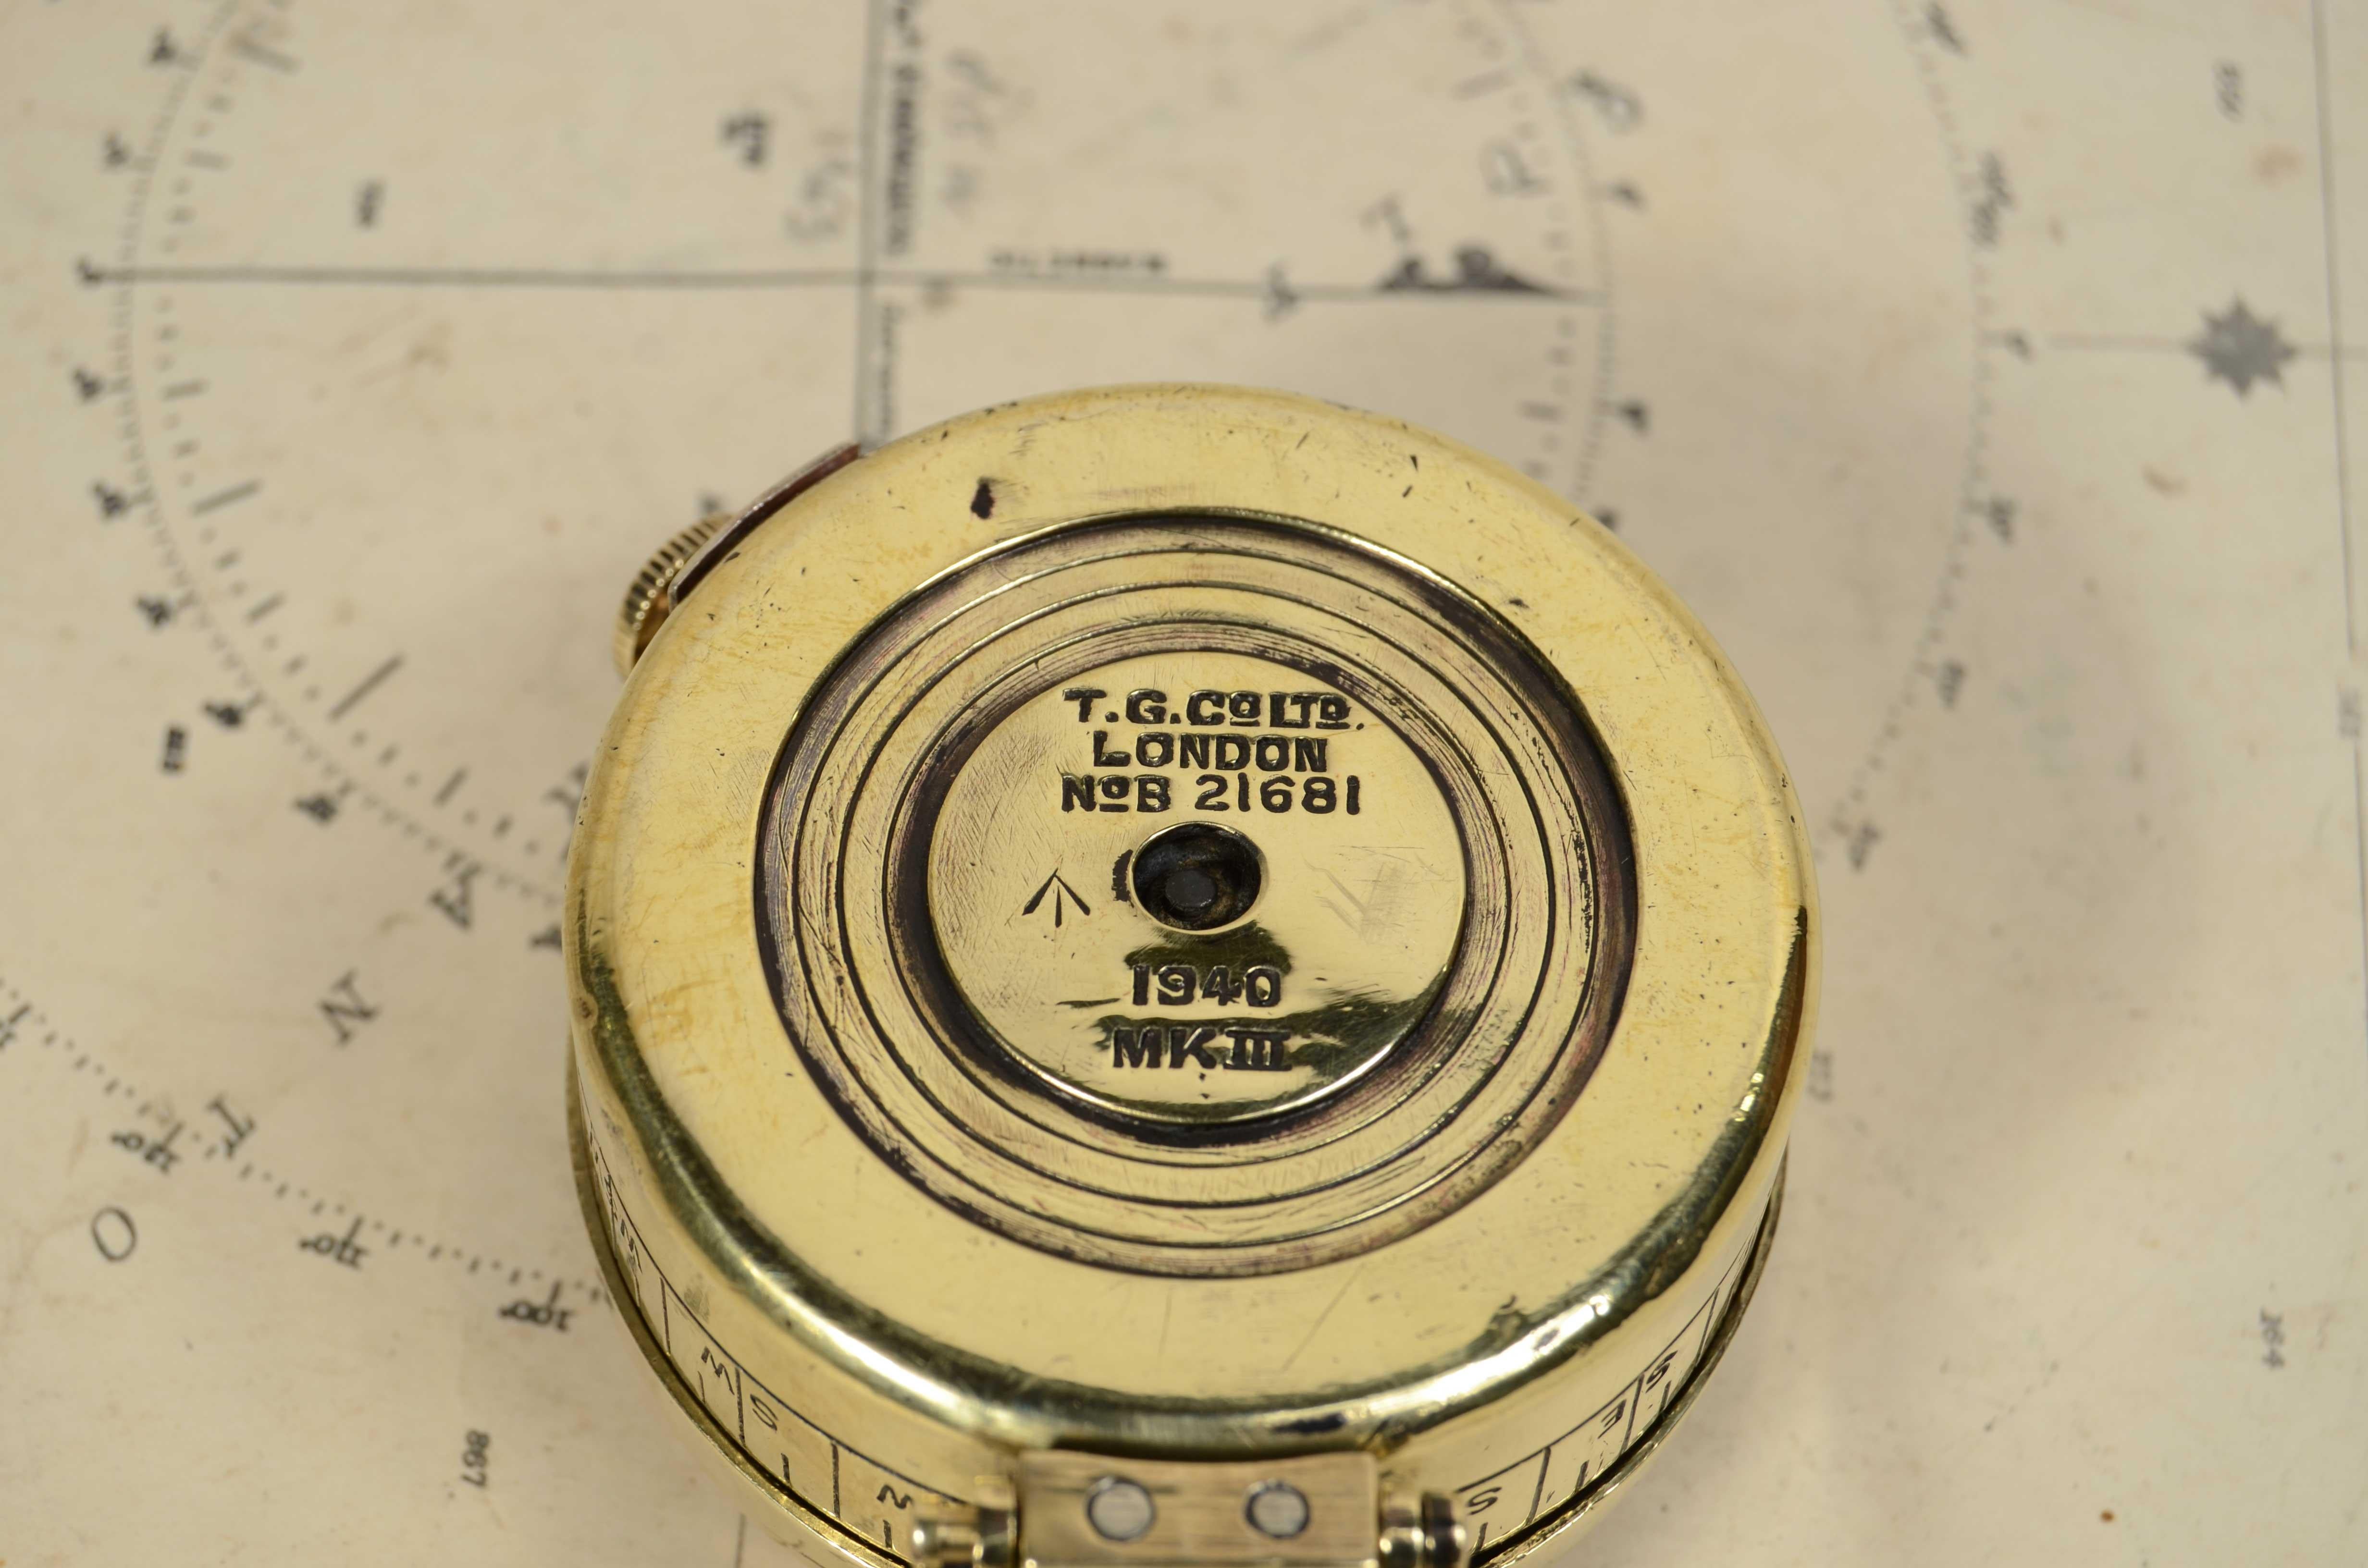 Prismatic compass  by detection signed T.G. Co Ltd London no. B 21681 1940 MK For Sale 11